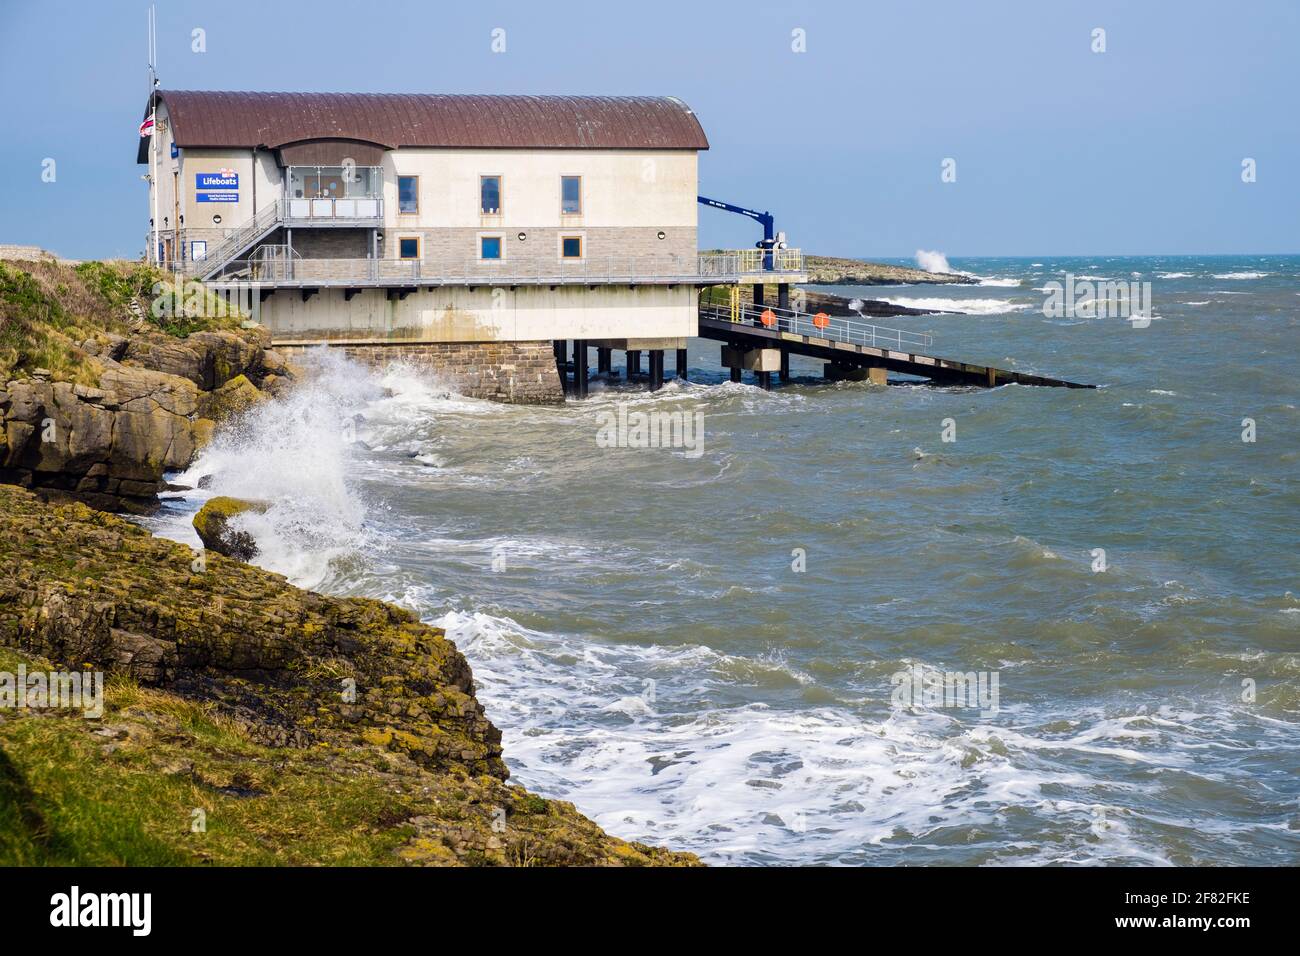 Rough choppy seas crashing on rocks at high tide by new RNLI lifeboat station boathouse in Moelfre, Isle of Anglesey, north Wales, UK, Britain Stock Photo